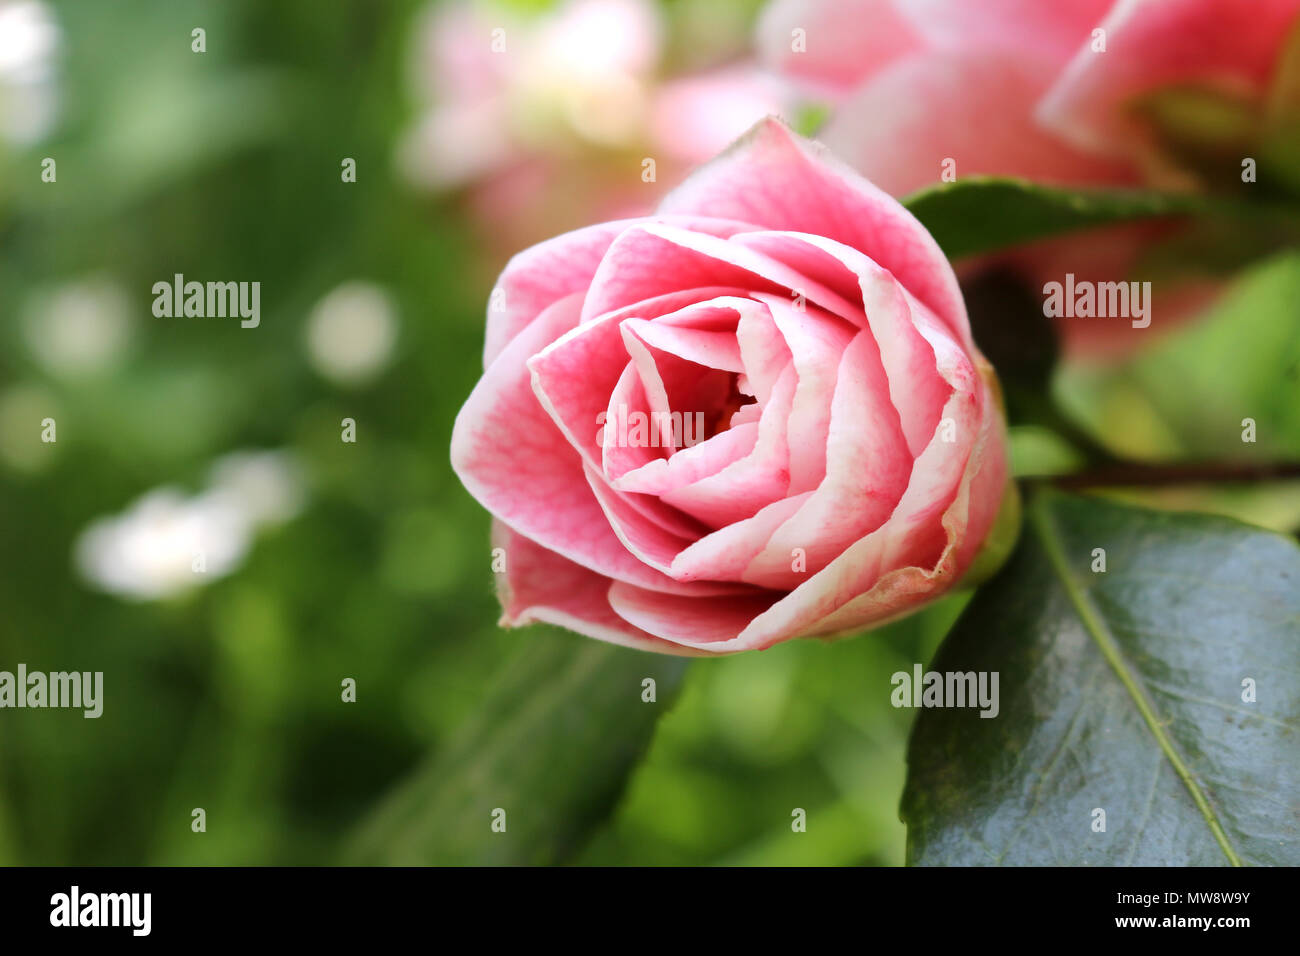 Striped Pale Pink Camellia Flower Stock Photo